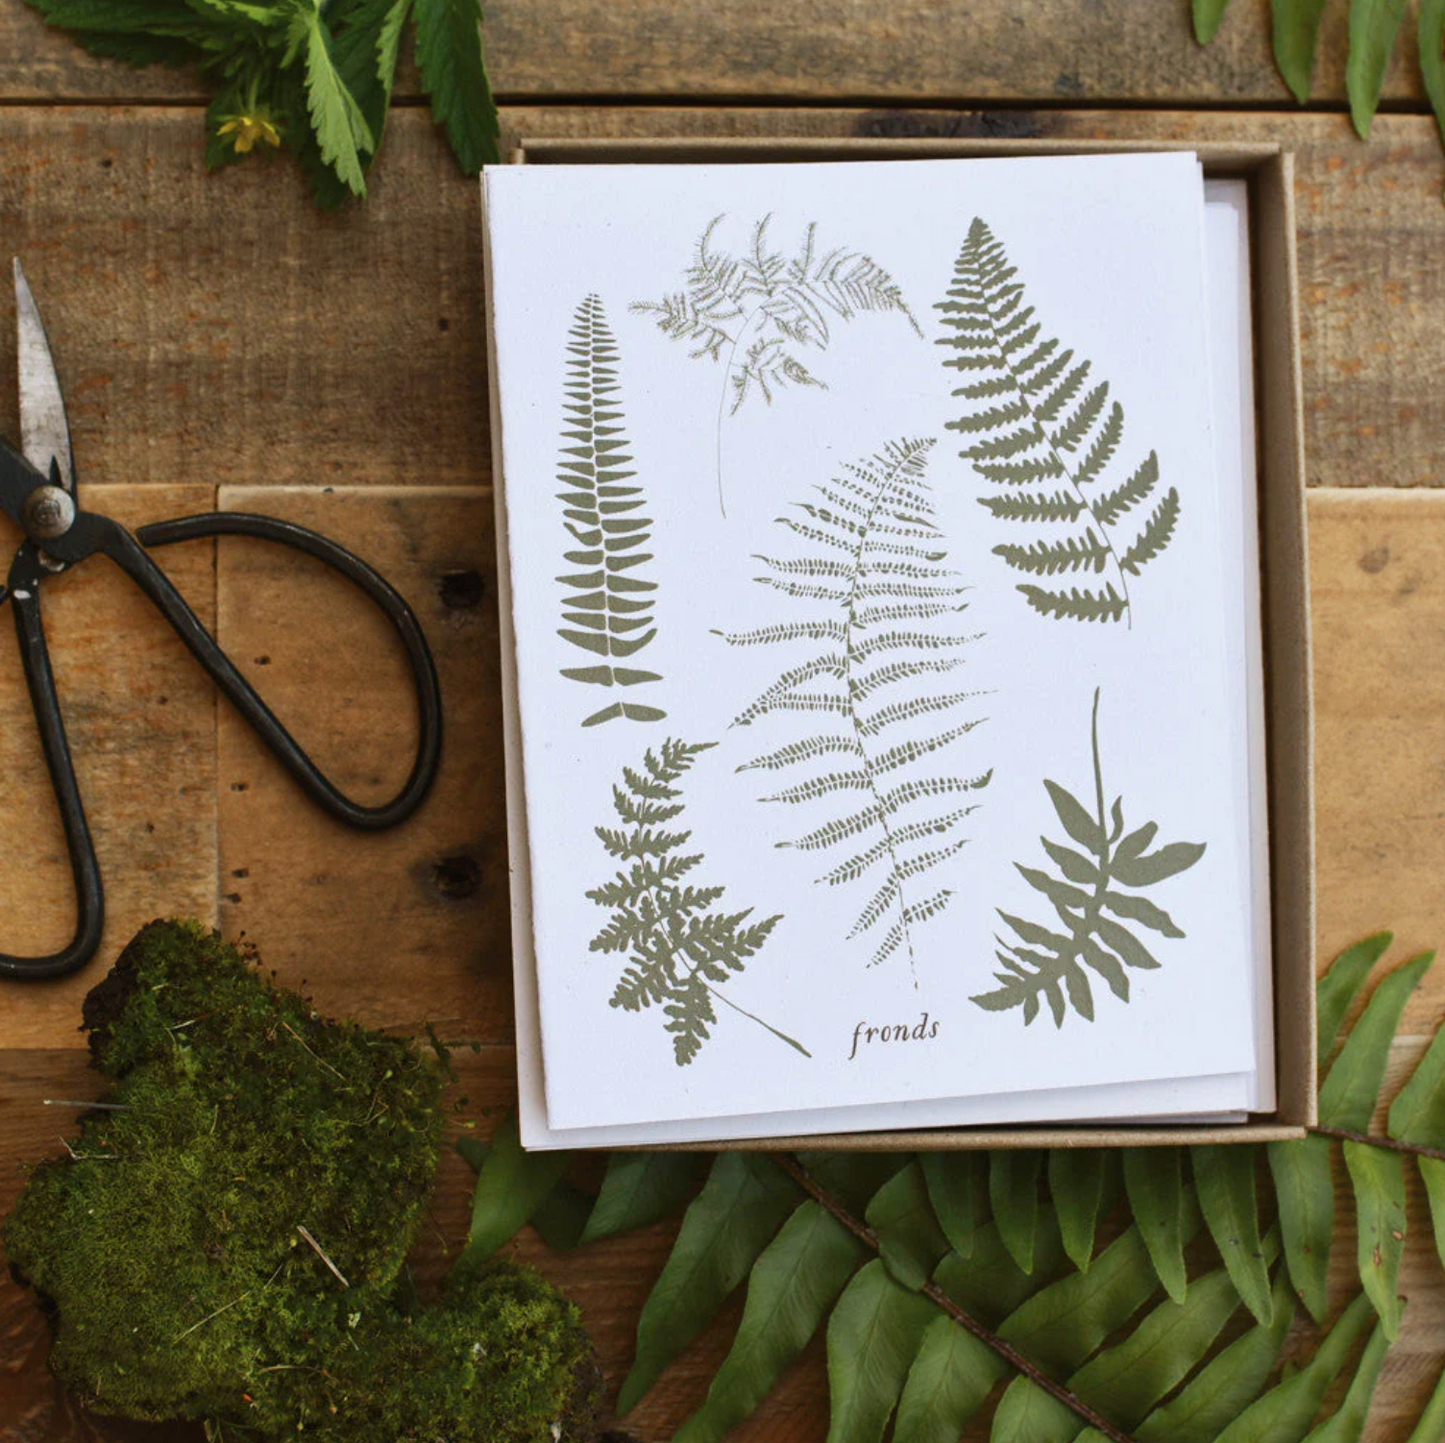 Fronds Cards Boxed Set